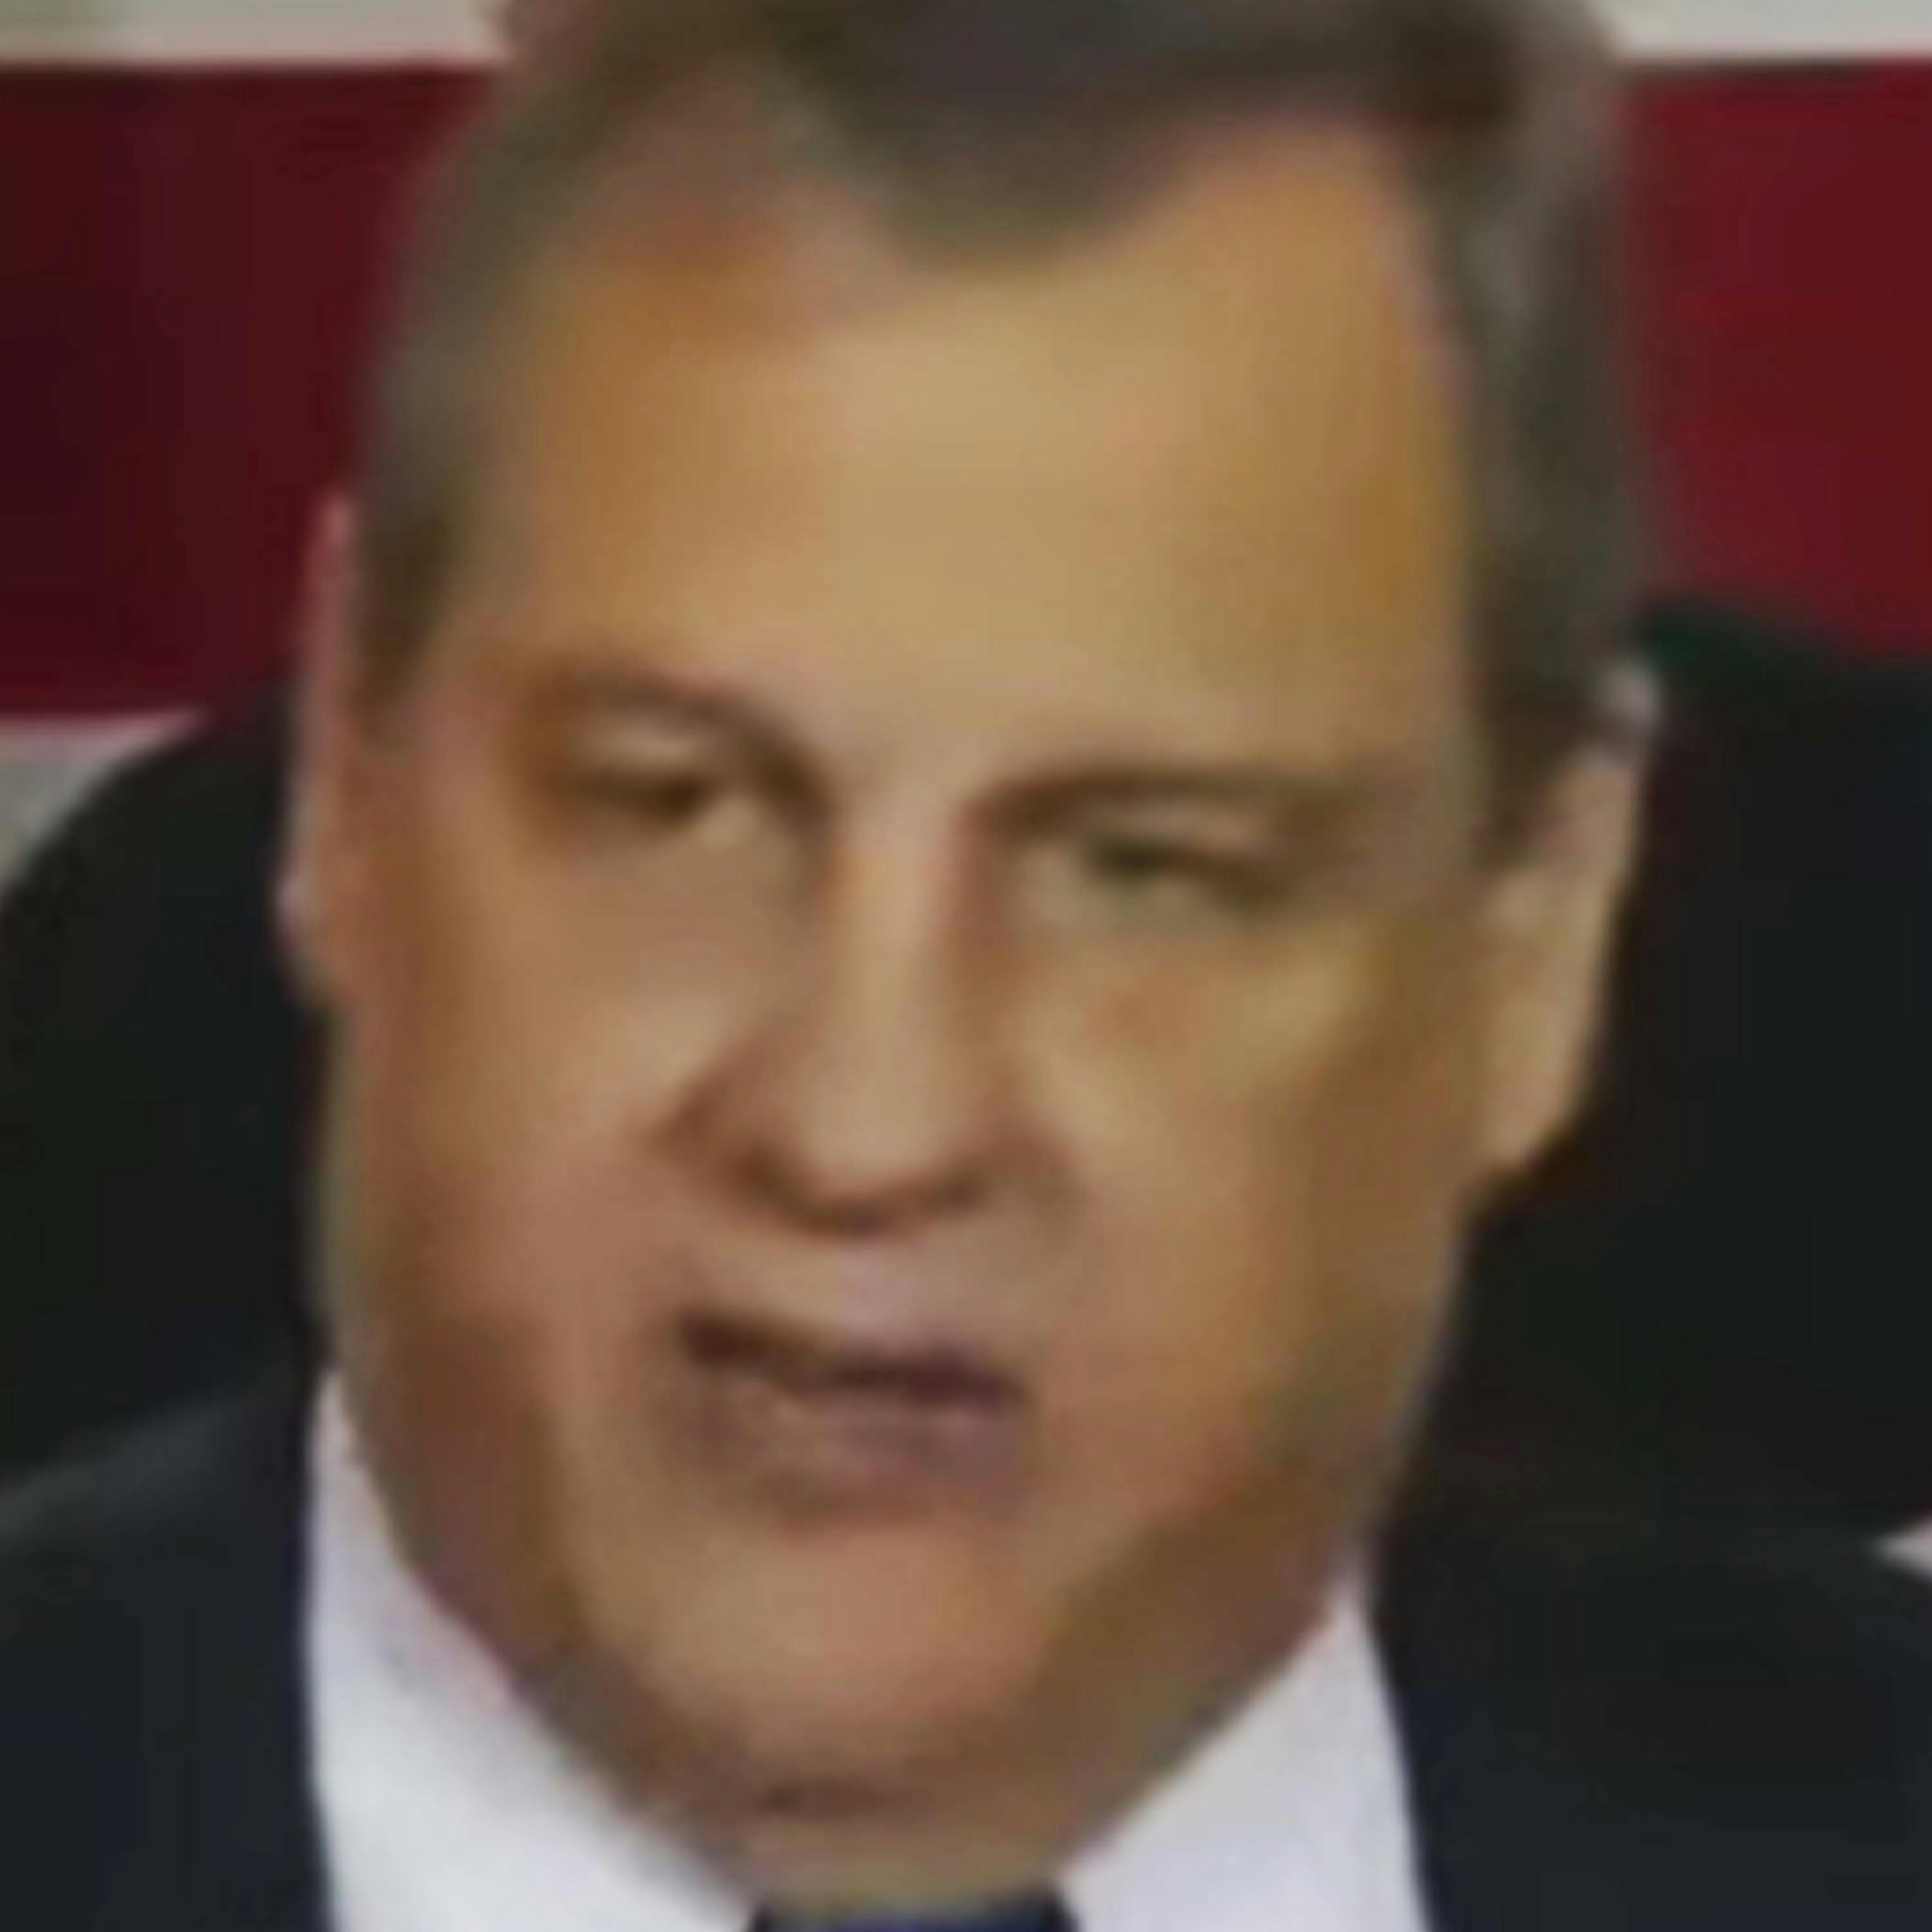 Down Goes Christie!